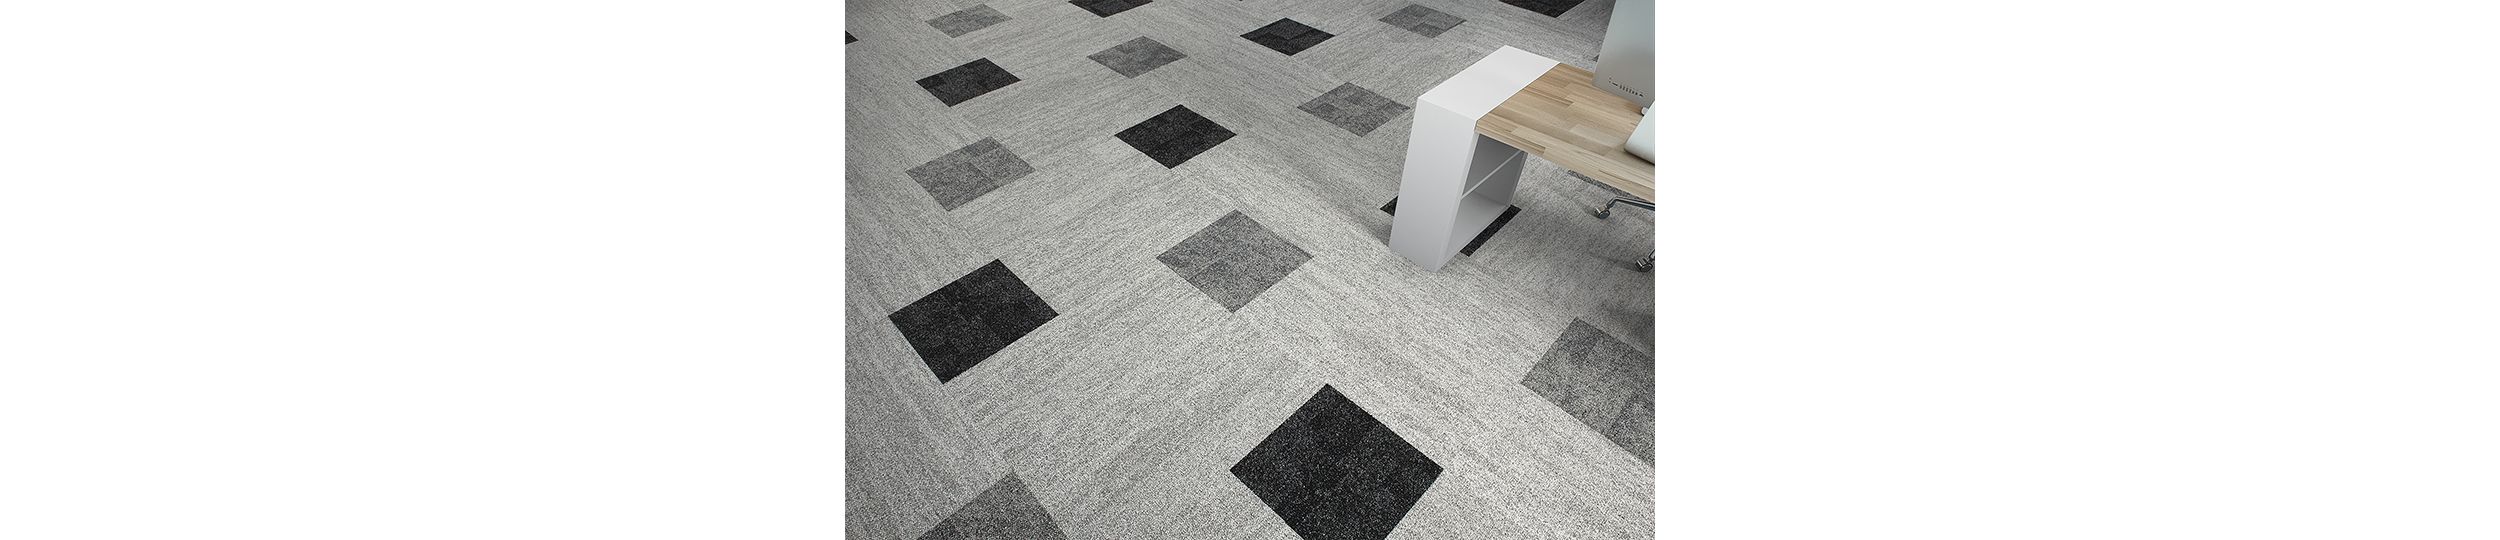 Interface Open Air 402 plank carpet tile in floor view with small workstation off to the right image number 3